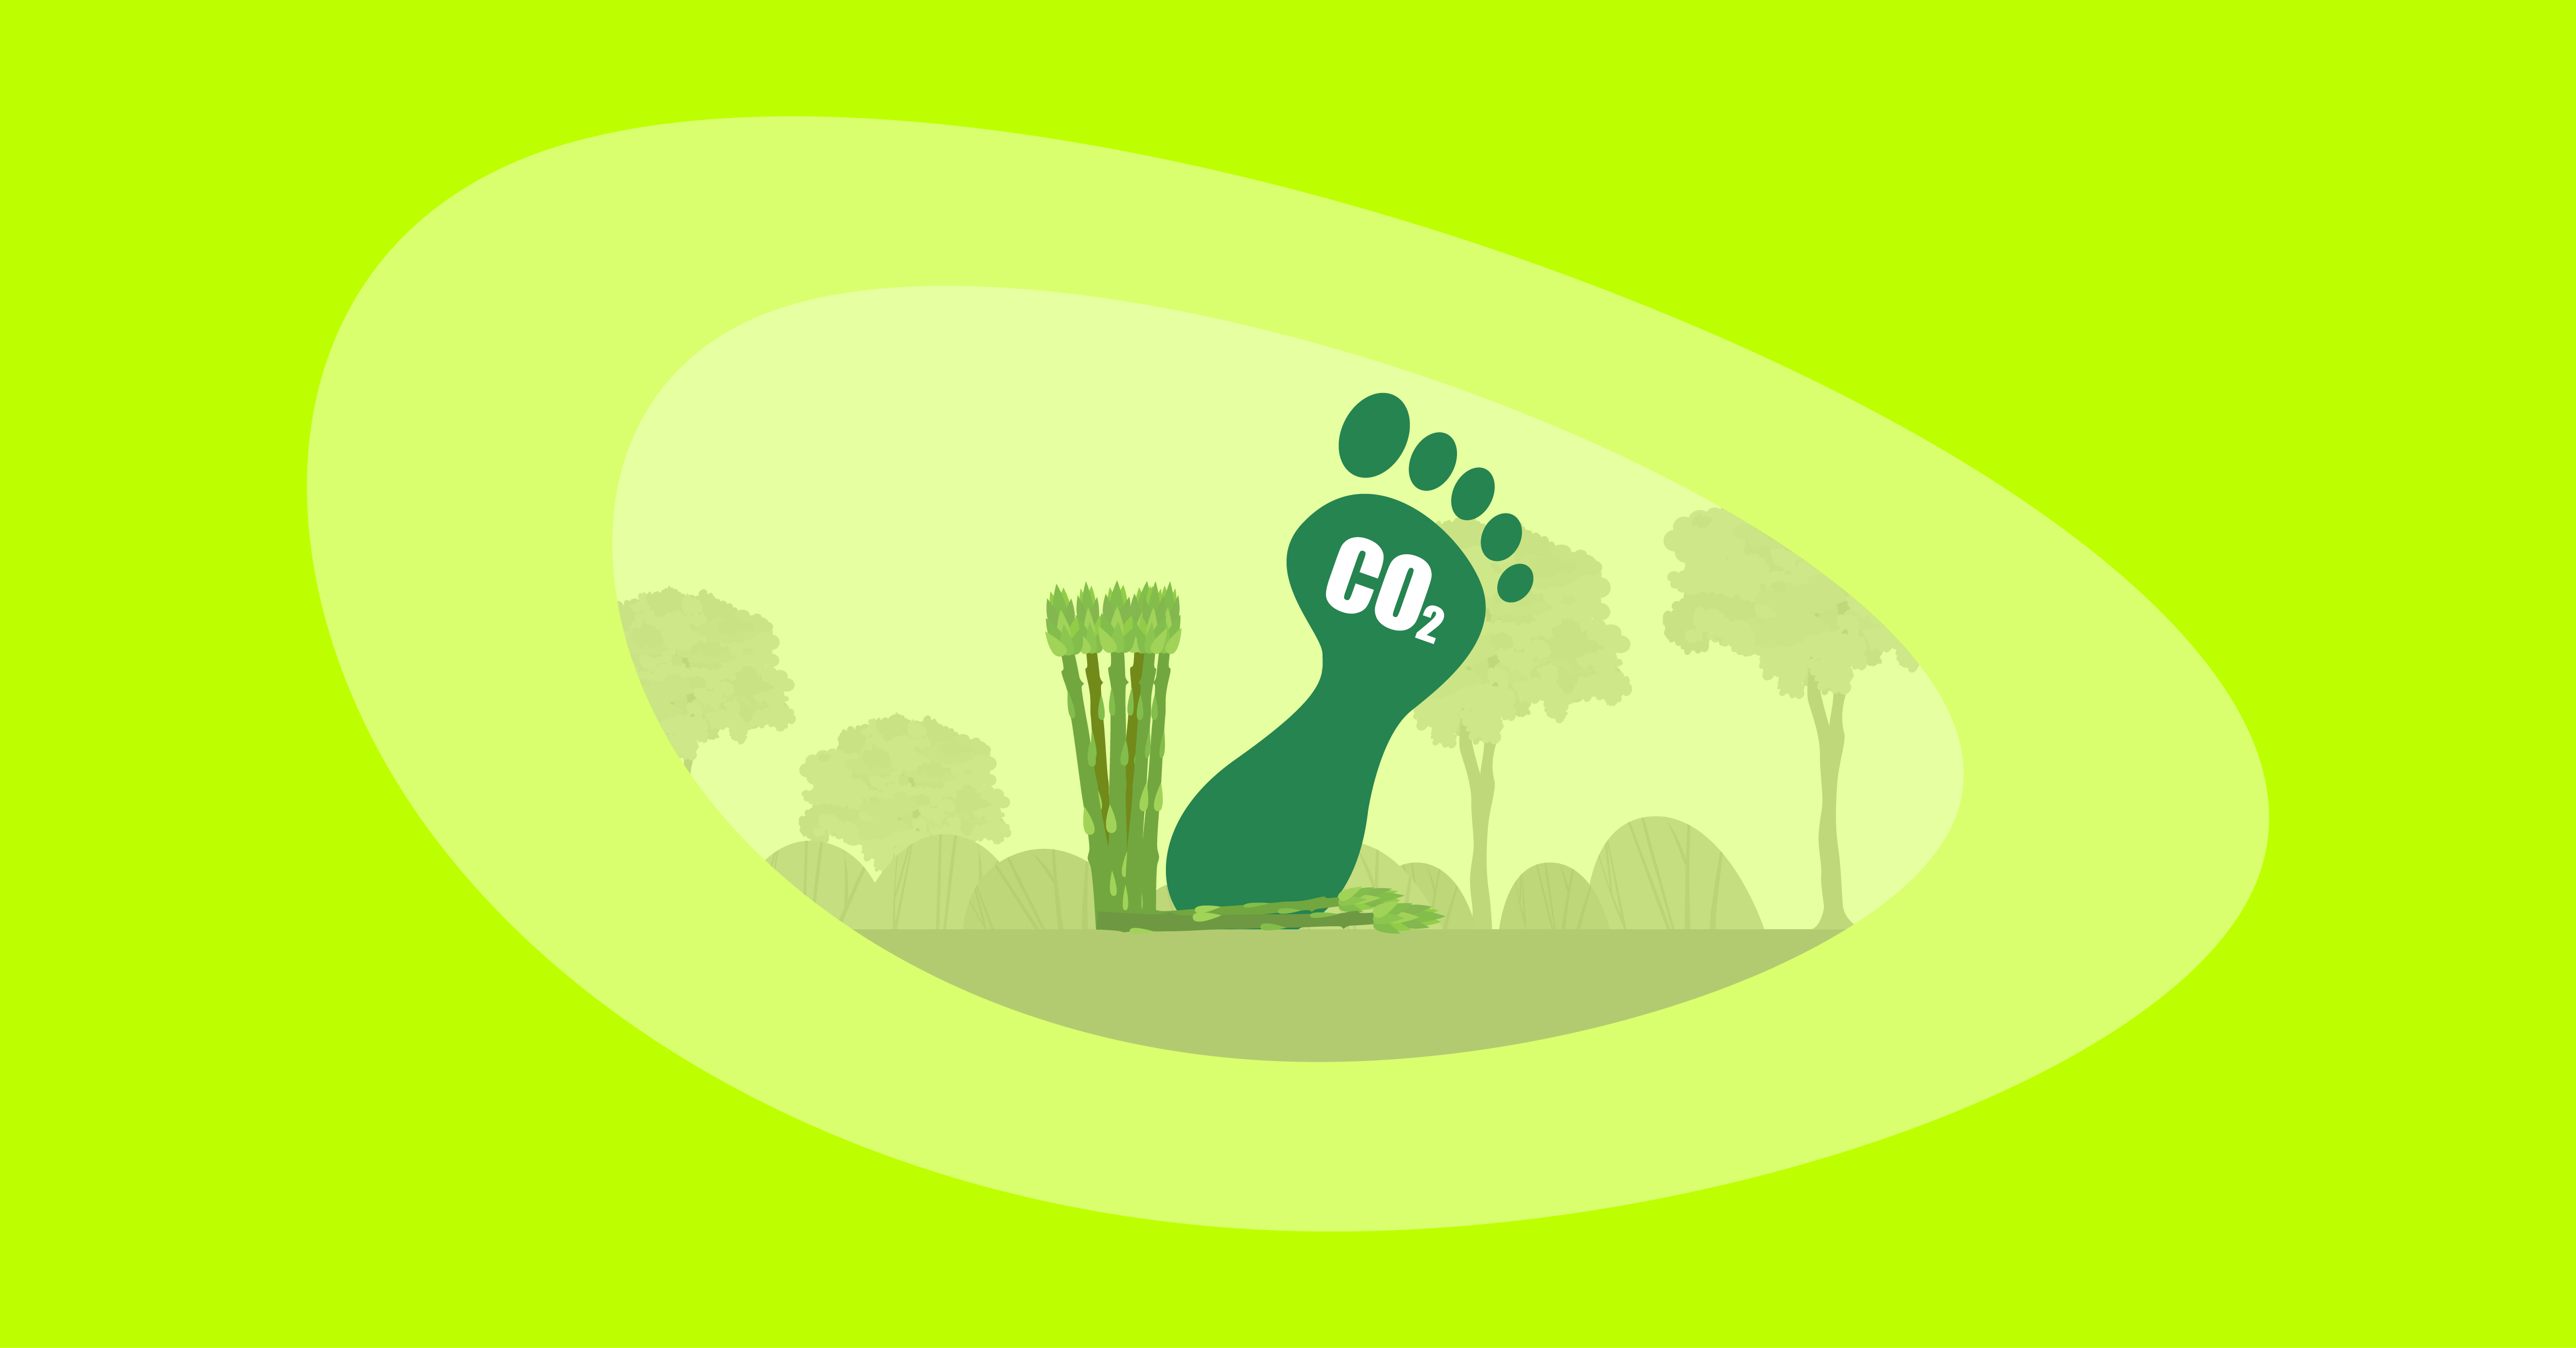 Illustration of asparagus with their carbon footprint